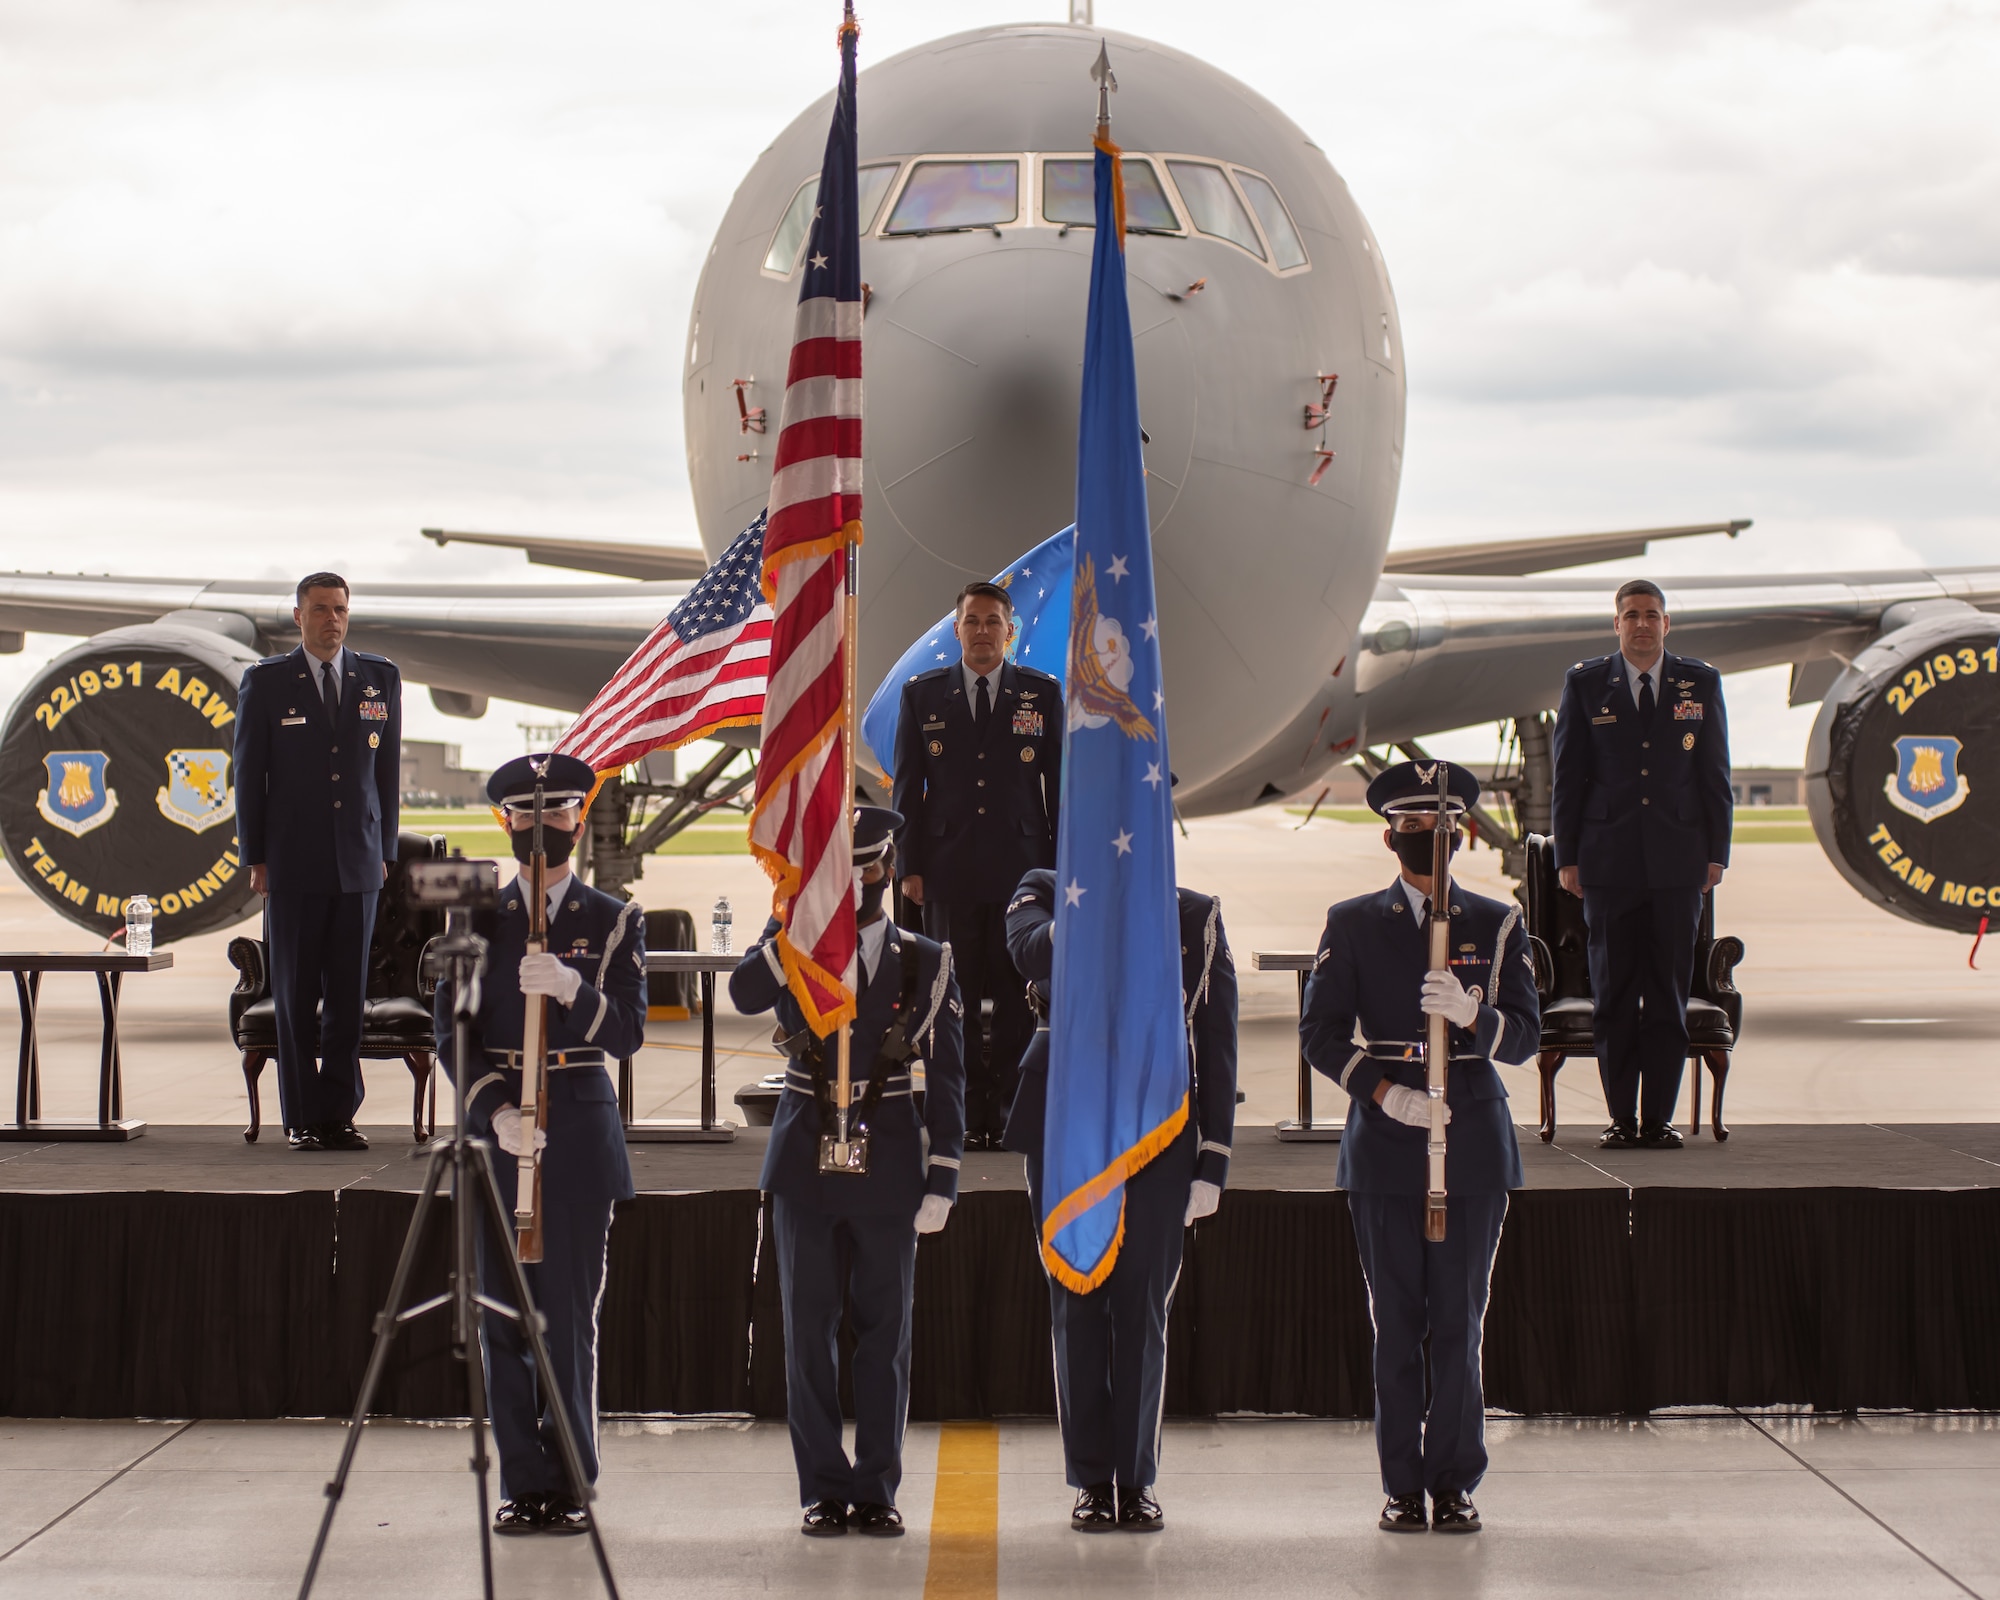 The base Honor Guard presents the colors during the 344th Air Refueling Squadron change of command ceremony May 27, 2020, at McConnell Air Force Base, Kansas. The 344th ARS is first unit in the Air Force to operate the KC-46A Pegasus, the latest generation of air refueling aircraft. (U.S. Air Force photo by Staff Sgt. Chris Thornbury)